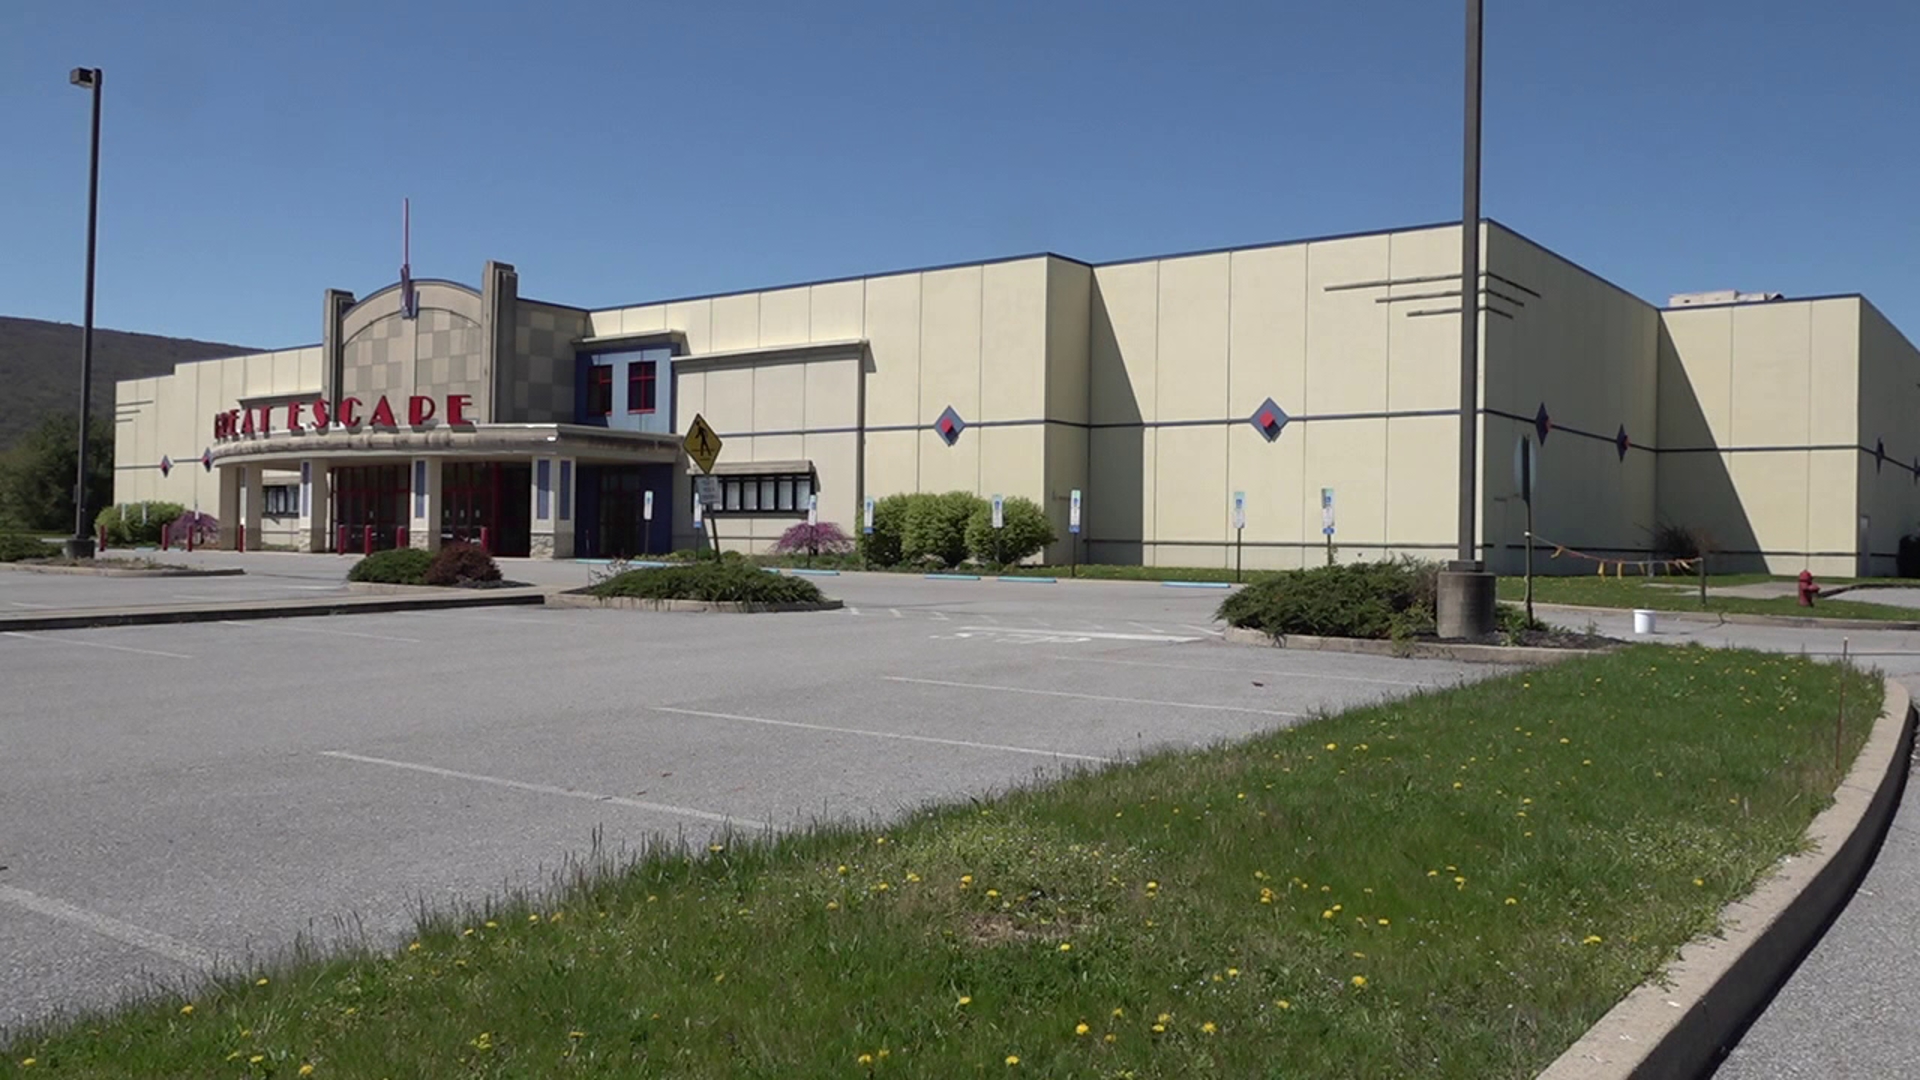 A new theater will soon replace the Regal Cinema at the Lycoming Mall, which was closed last year.